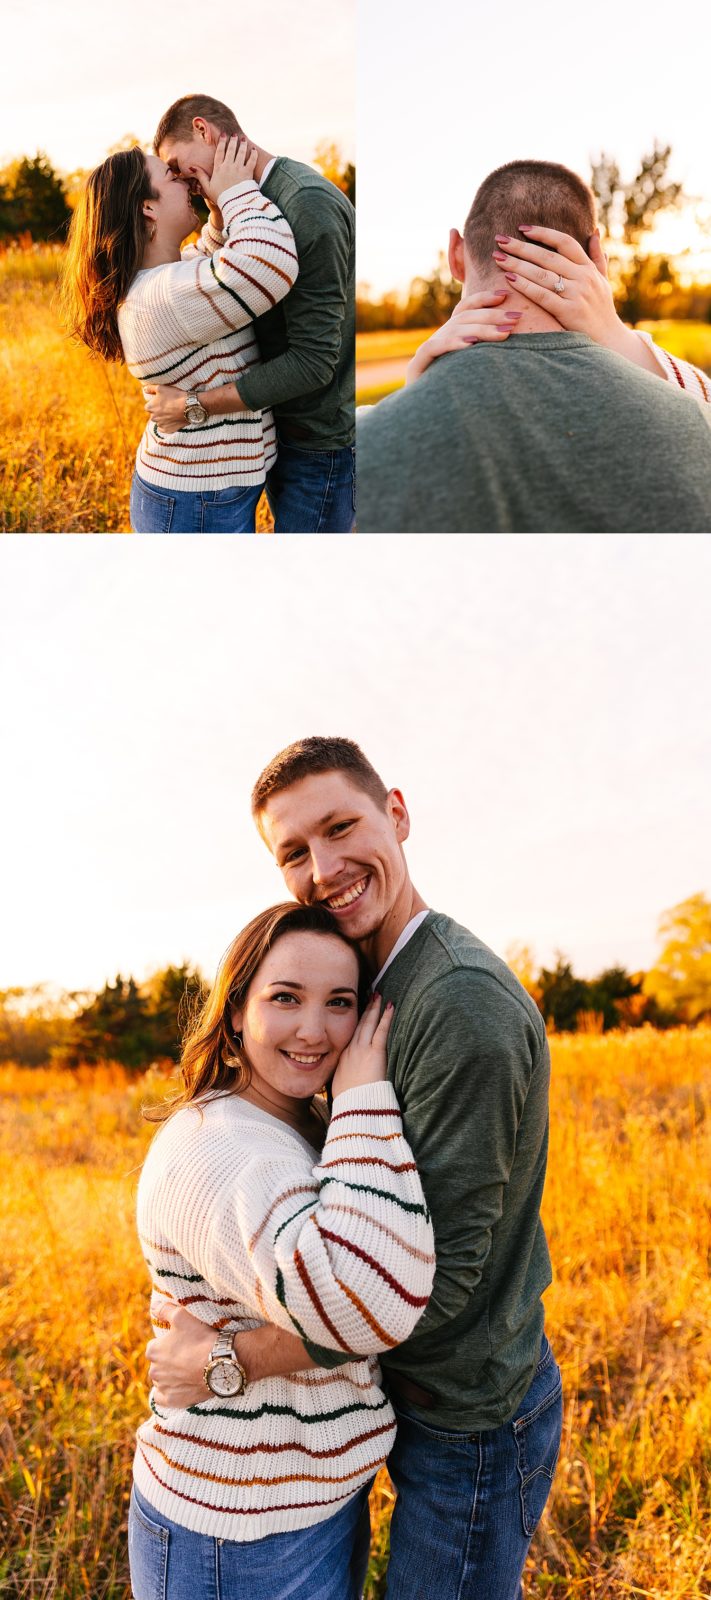 Woman embracing man in a field at golden hour for their couples photo shoot.